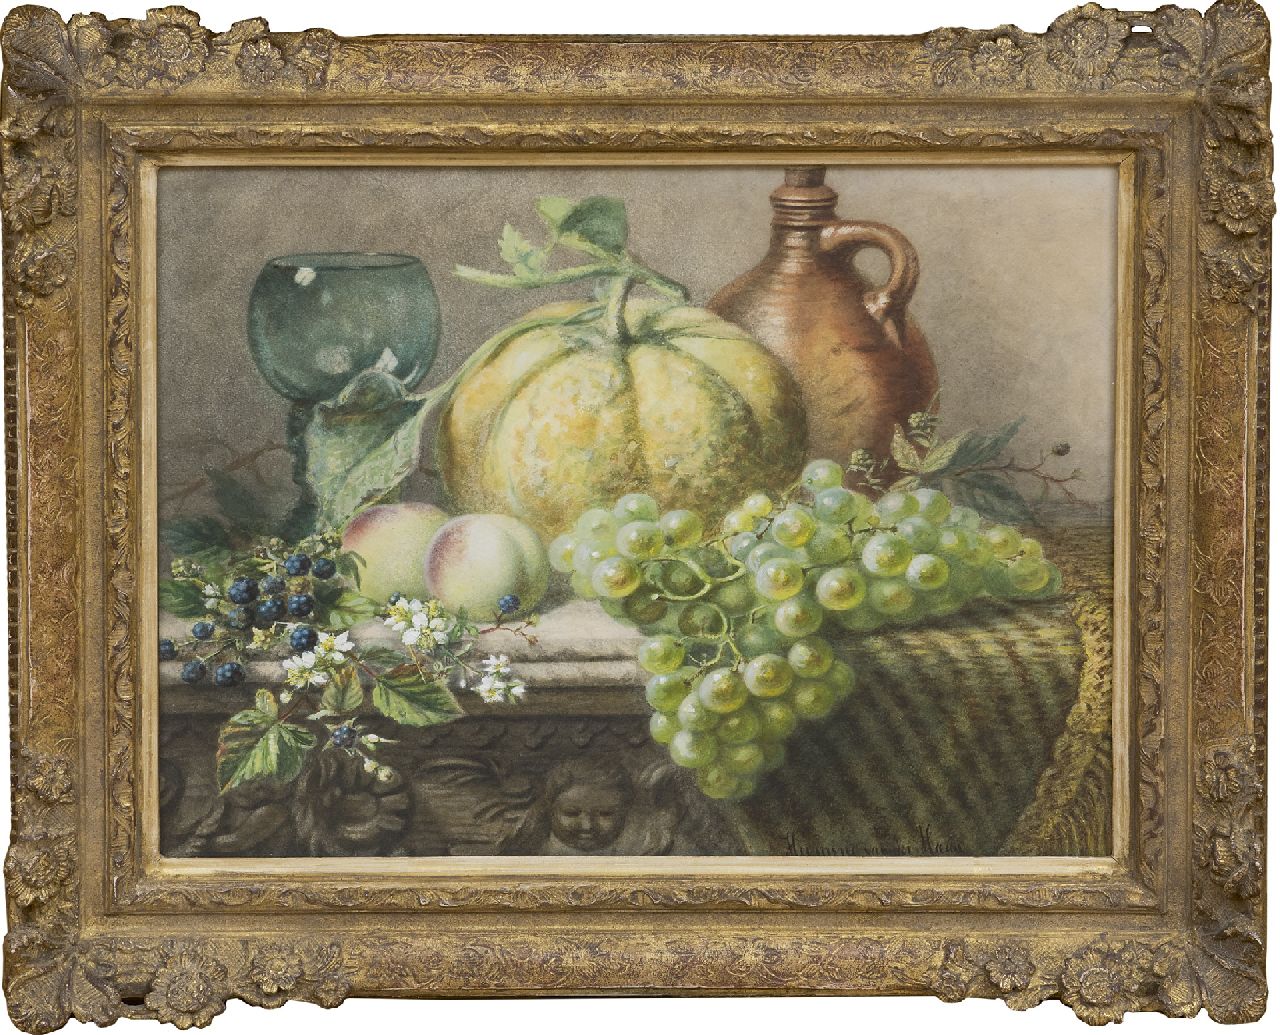 Haas C.P.H. van der | Charlotte Petronella 'Hermina' van der Haas | Watercolours and drawings offered for sale | Still life with fruit and a rummer, watercolour on paper 39.1 x 48.8 cm, signed l.r.